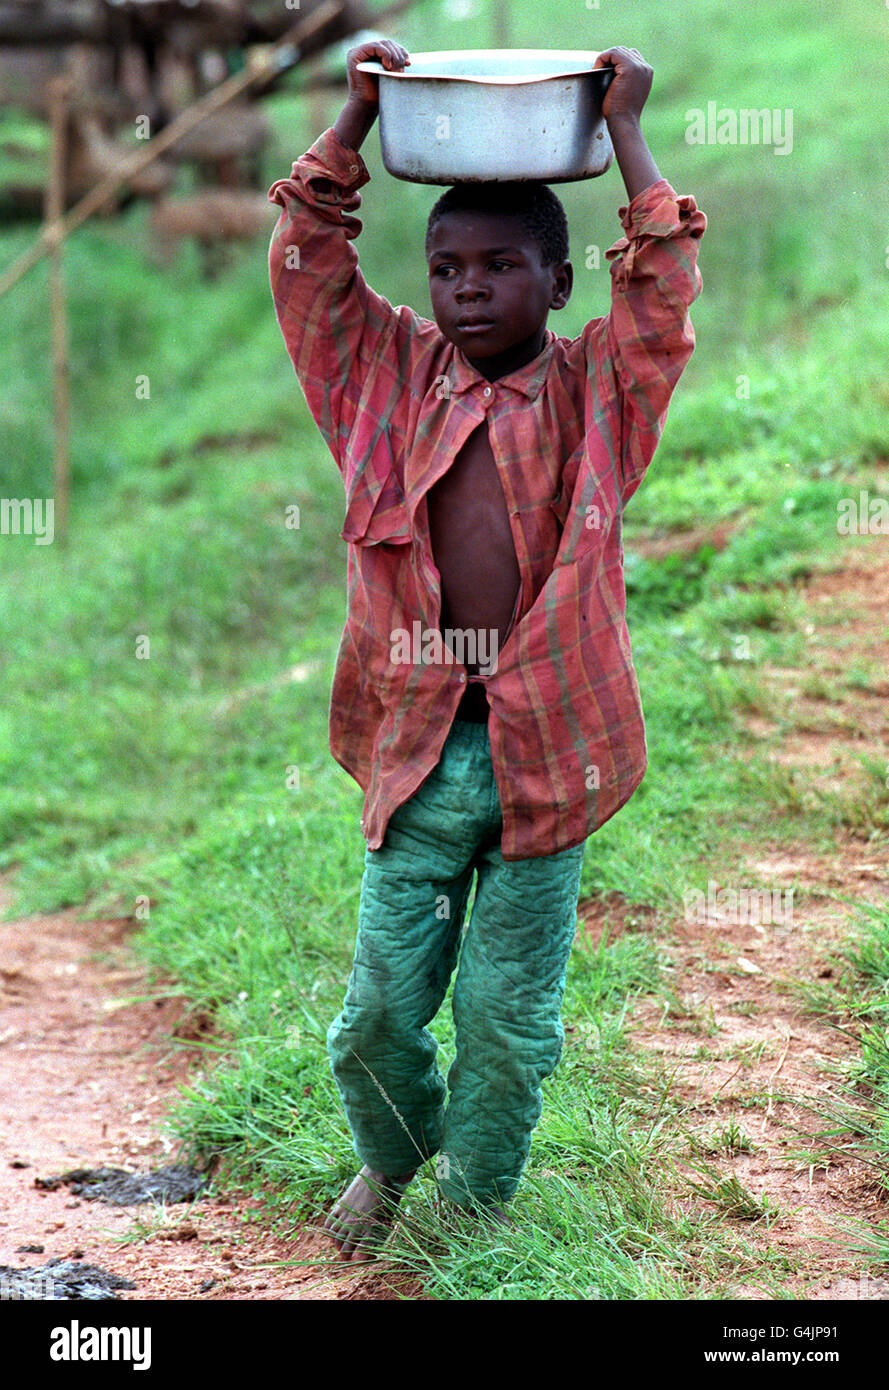 A yong boy carries a metal basin on his head in Njombe Town, Tanzania. The picture was taken during Melanie Clark Pullen's (Mary in Eastenders) trip to East Africa, to highlight the Jubilee 2000 Campaign to cancel Third World debt. Stock Photo